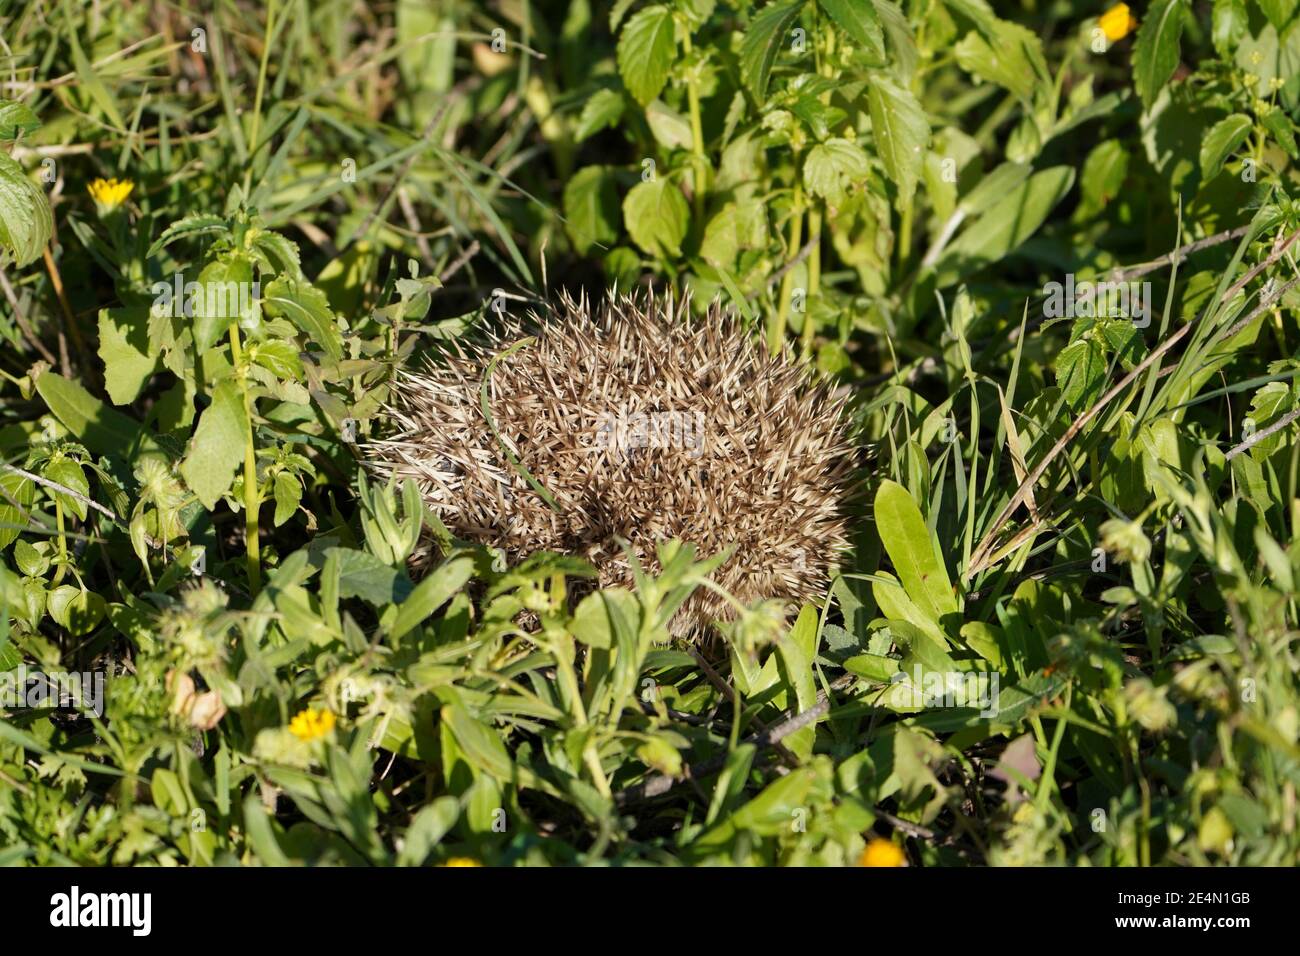 A young European hedgehog rolled in a ball. Spain. Stock Photo